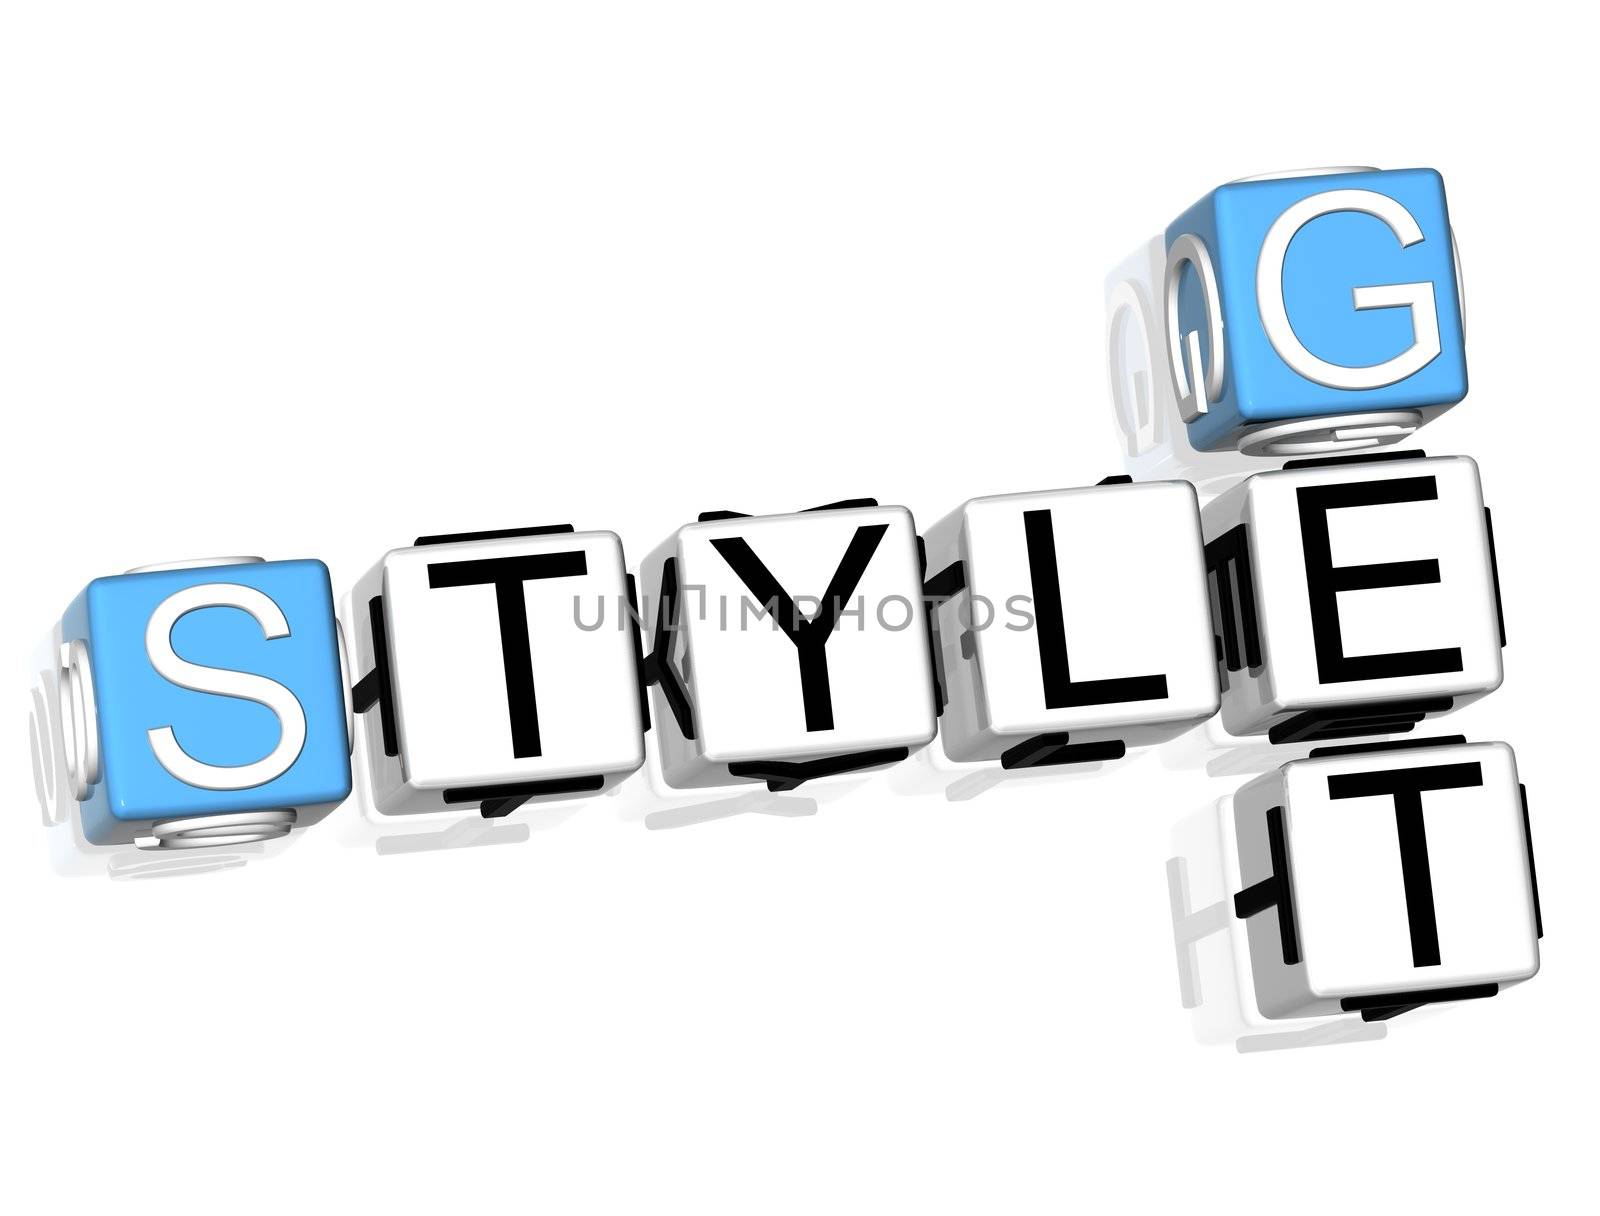 3D Get Style Crossword on white background